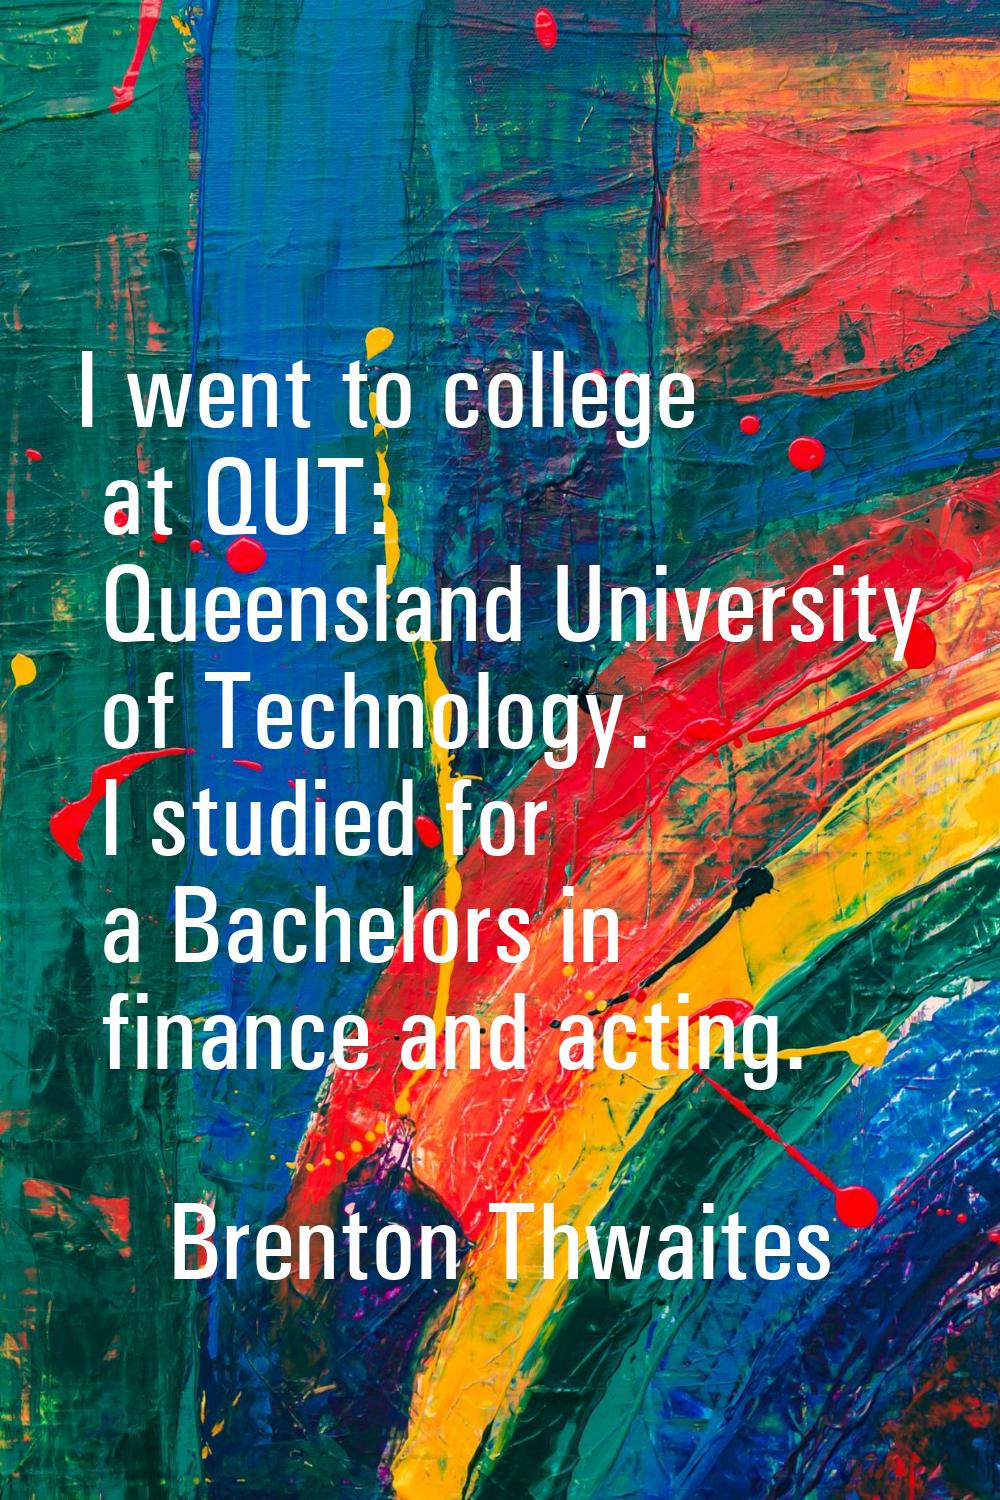 I went to college at QUT: Queensland University of Technology. I studied for a Bachelors in finance